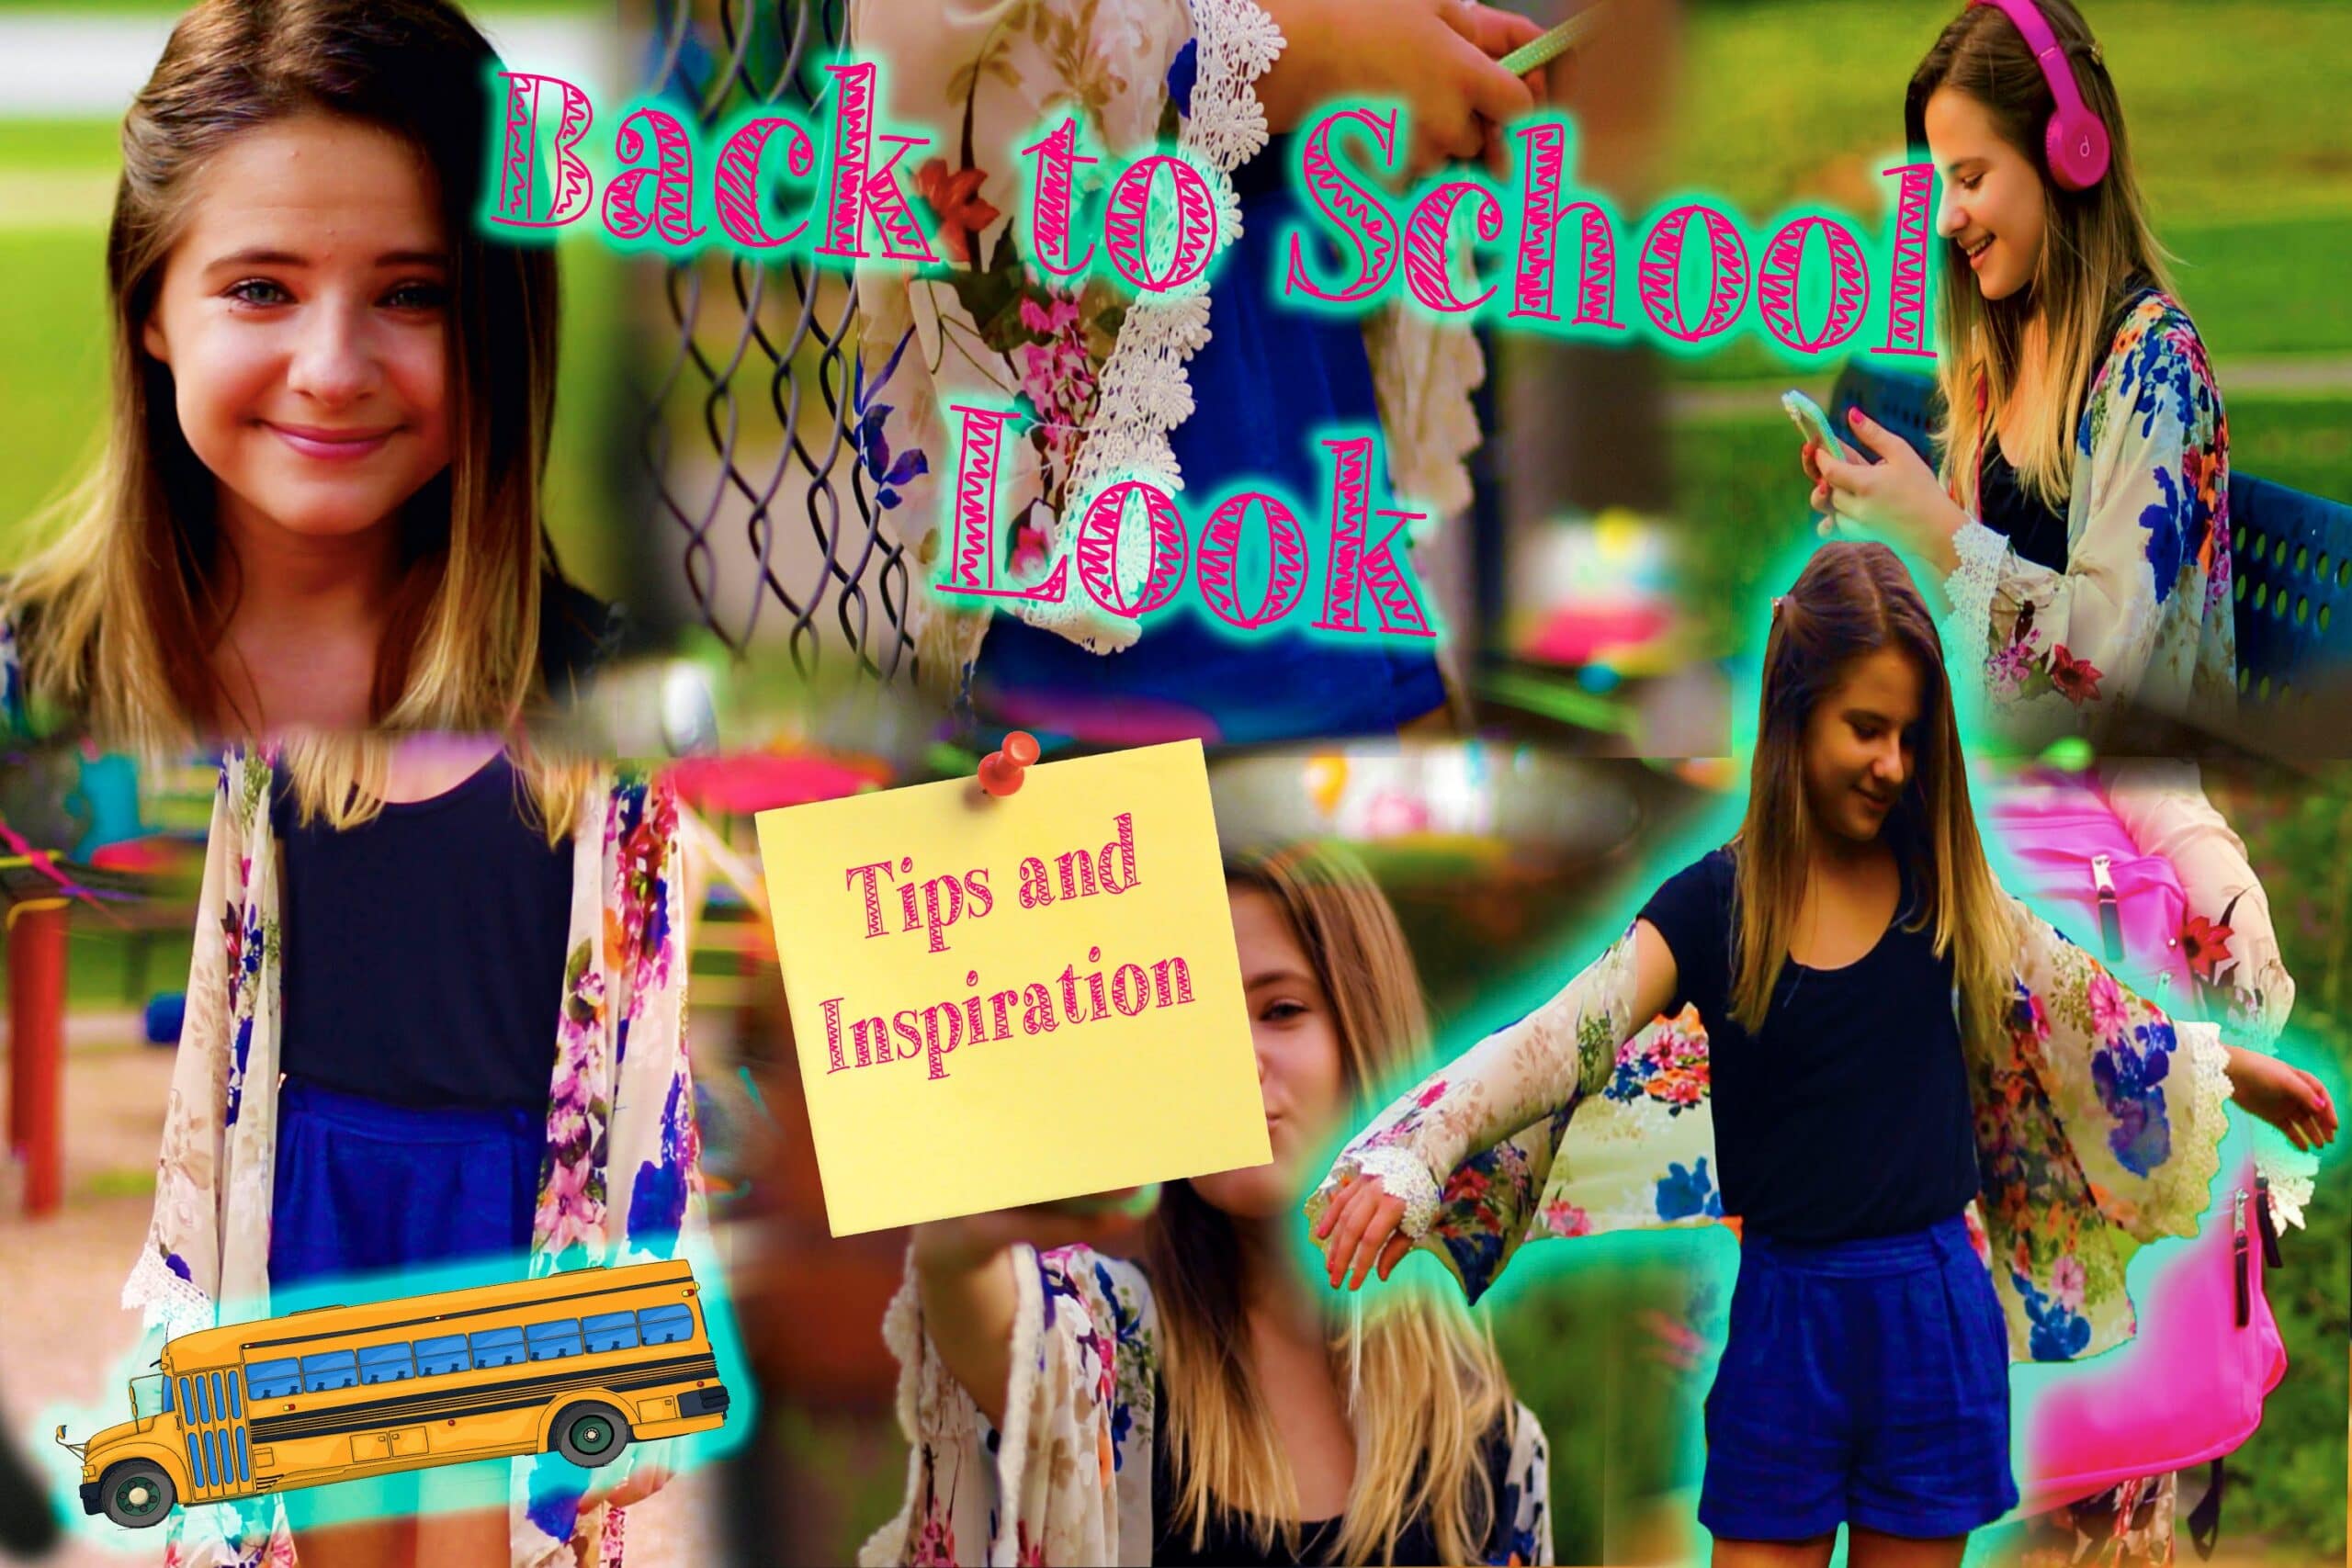 Back to School Hair, Makeup, and Outfit Inspiration and Tips